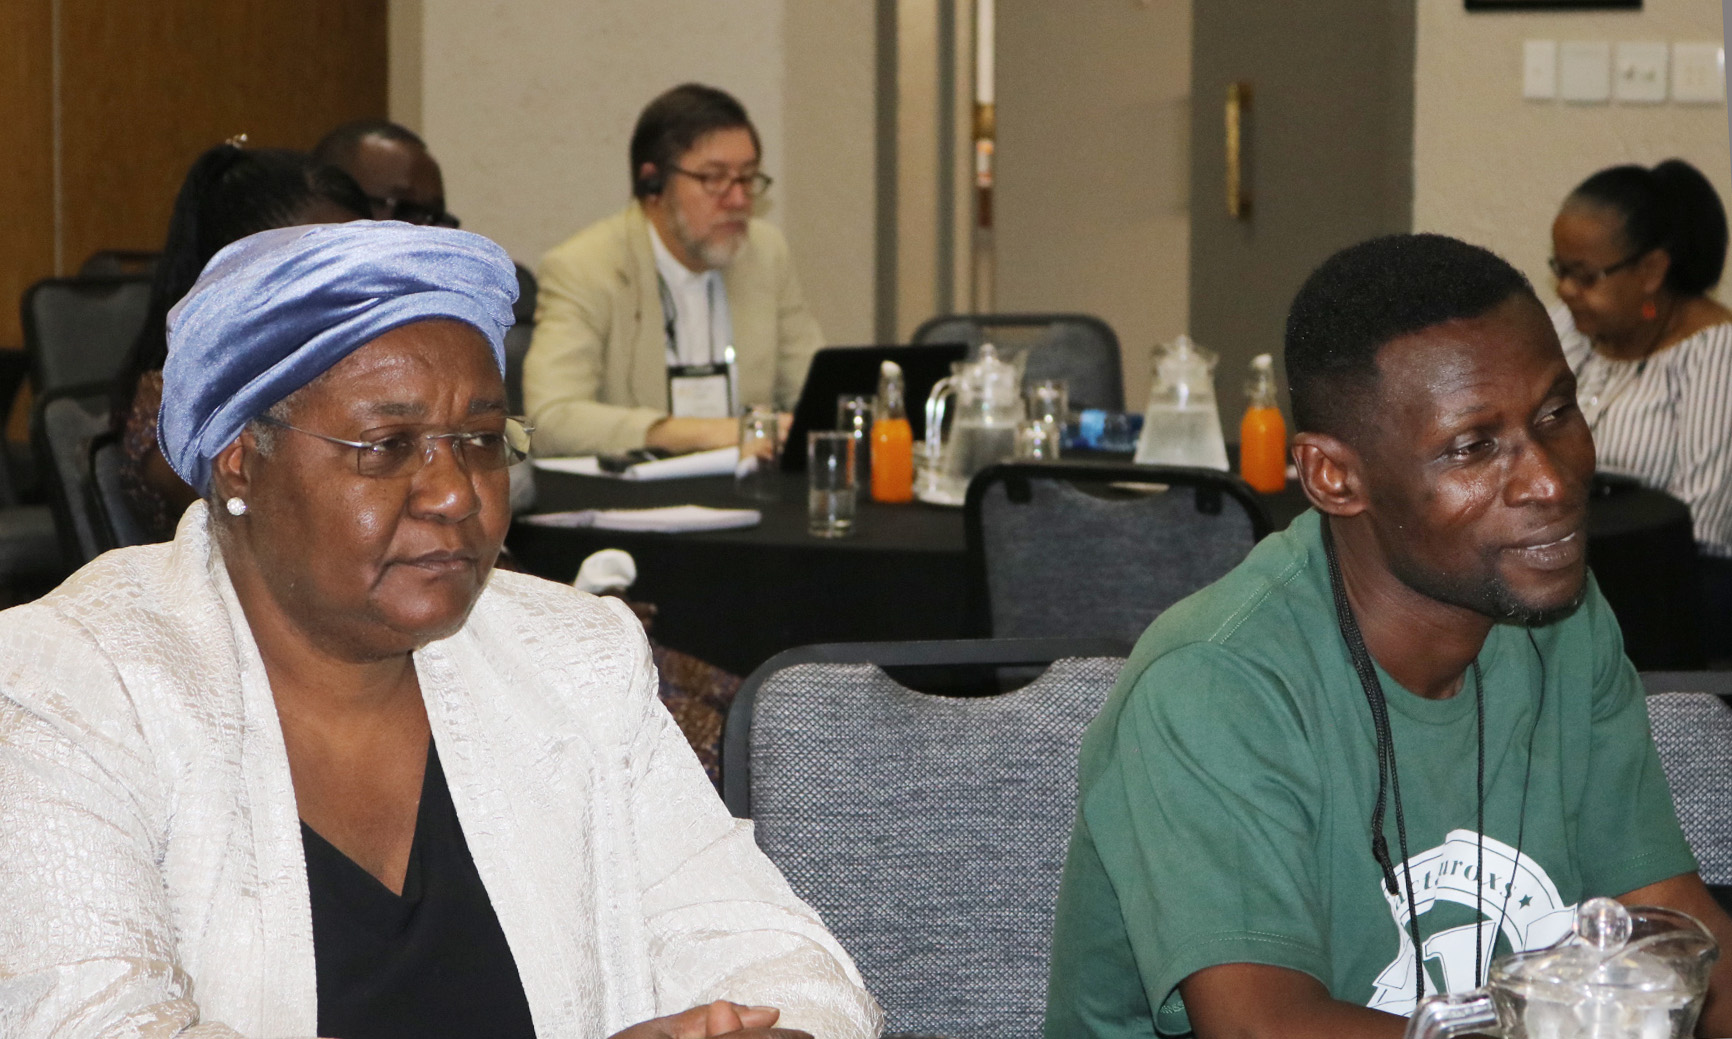 Bishop Joaquina F. Nhanala of Mozambique and agricultural missionary Innocent Afful listen to The United Methodist Church’s plans for existing land in Africa during an agricultural summit held Jan. 13-16 in Johannesburg. Photo by Eveline Chikwanah.